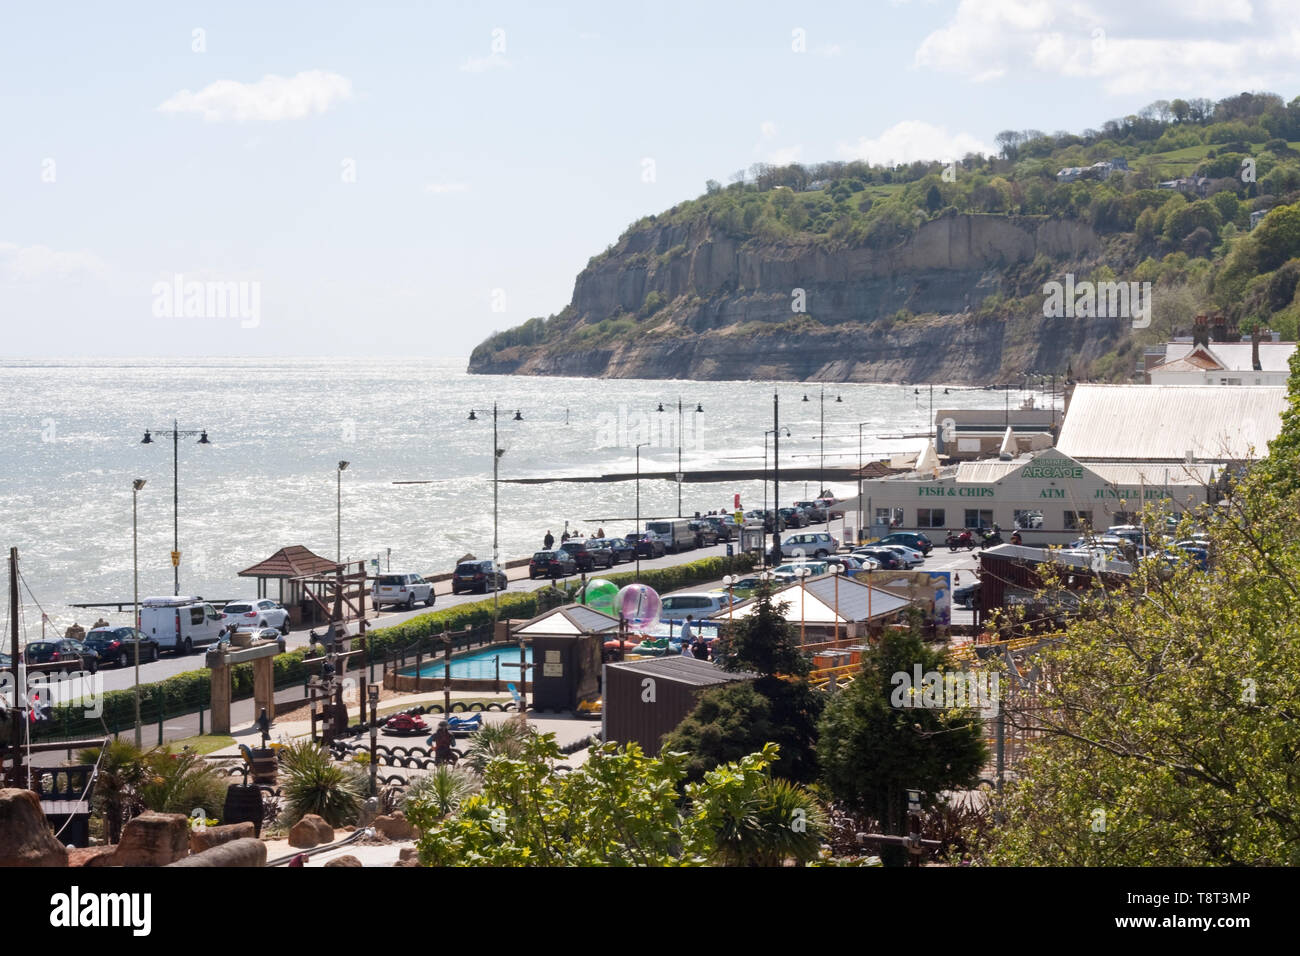 View of Shanklin seafront with Knock Cliff in the background Stock Photo